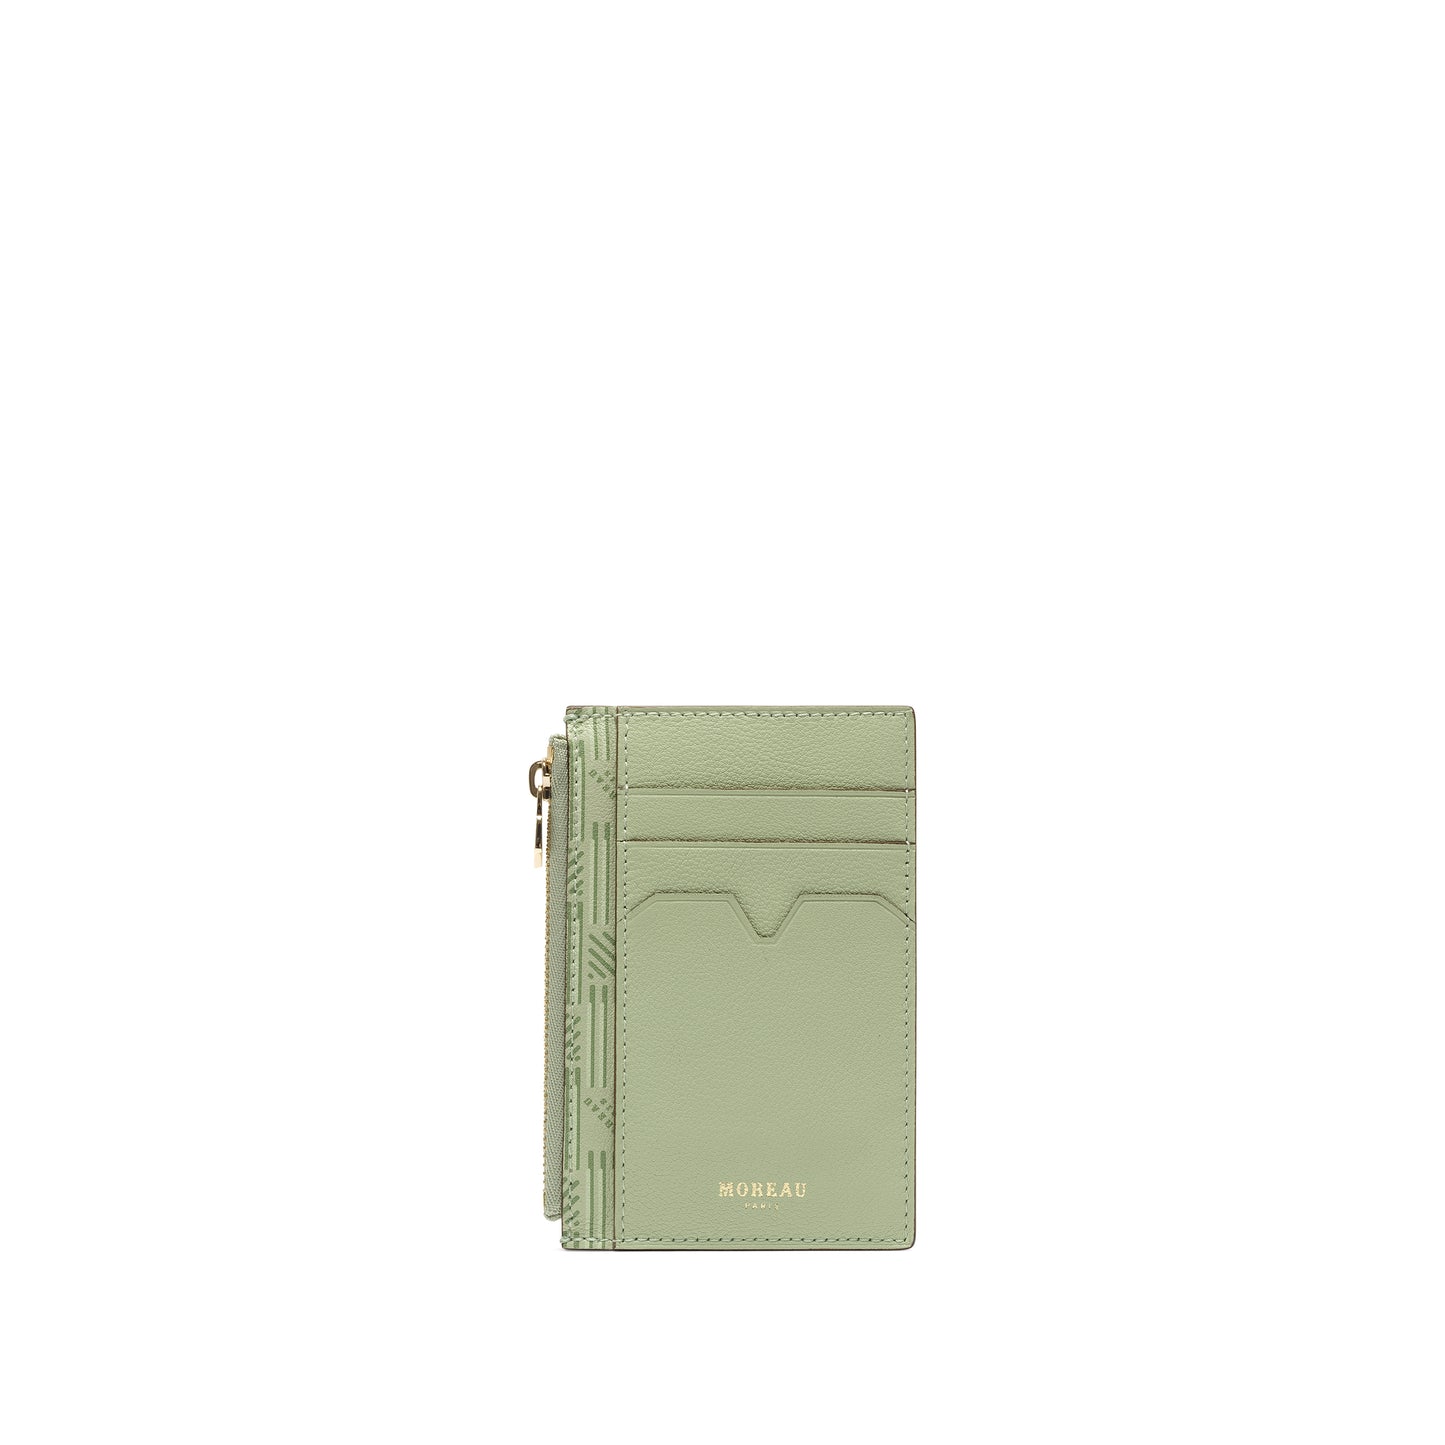 3 Credit Card Holder with Zip in Mint